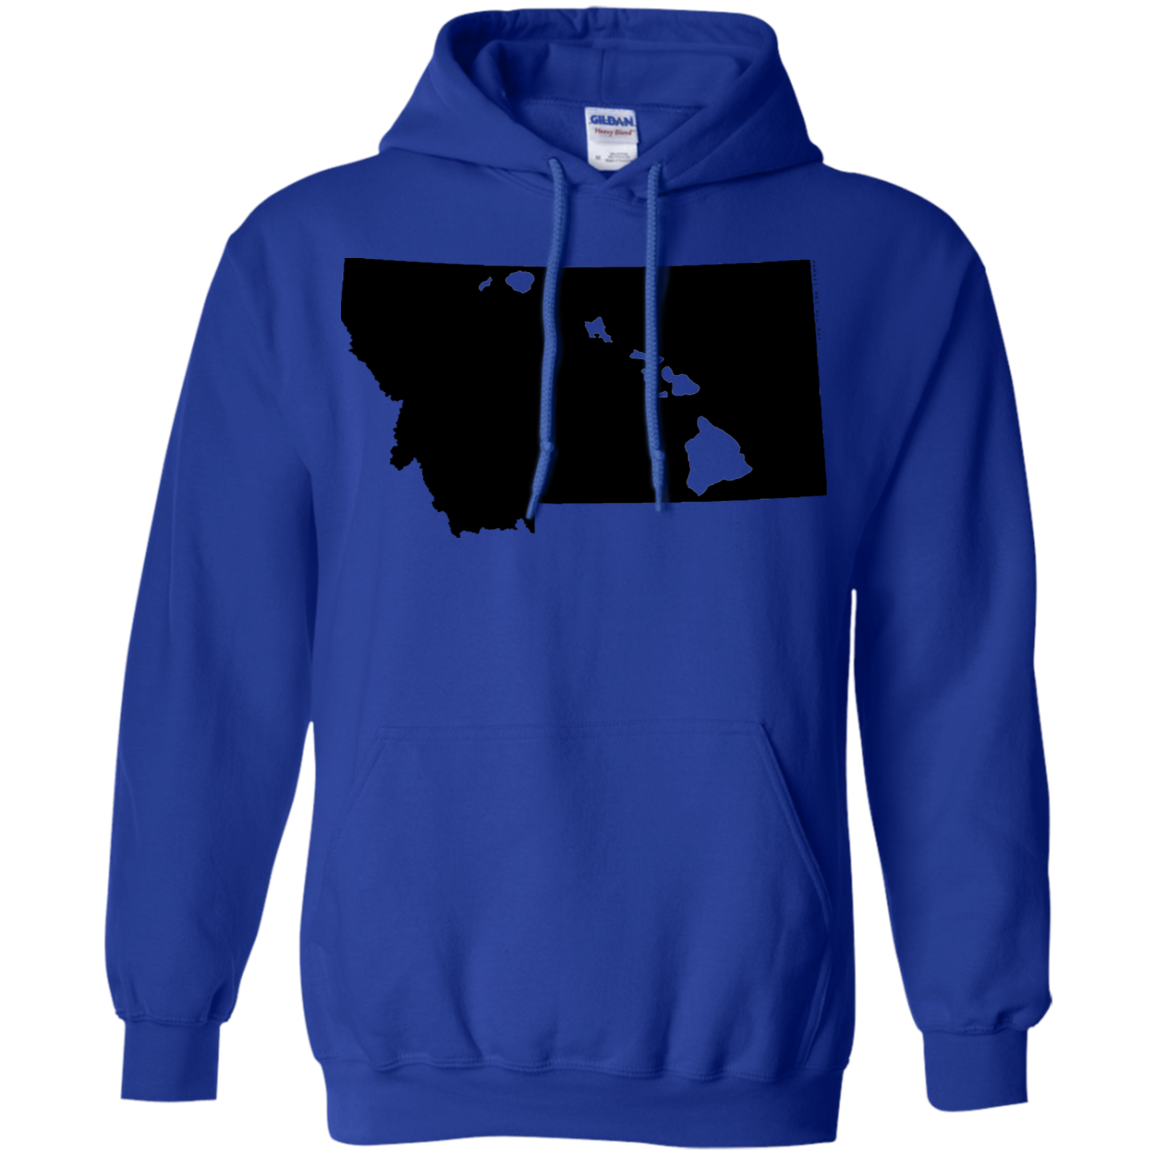 Living in Montana with Hawaii Roots Pullover Hoodie 8 oz., Sweatshirts, Hawaii Nei All Day